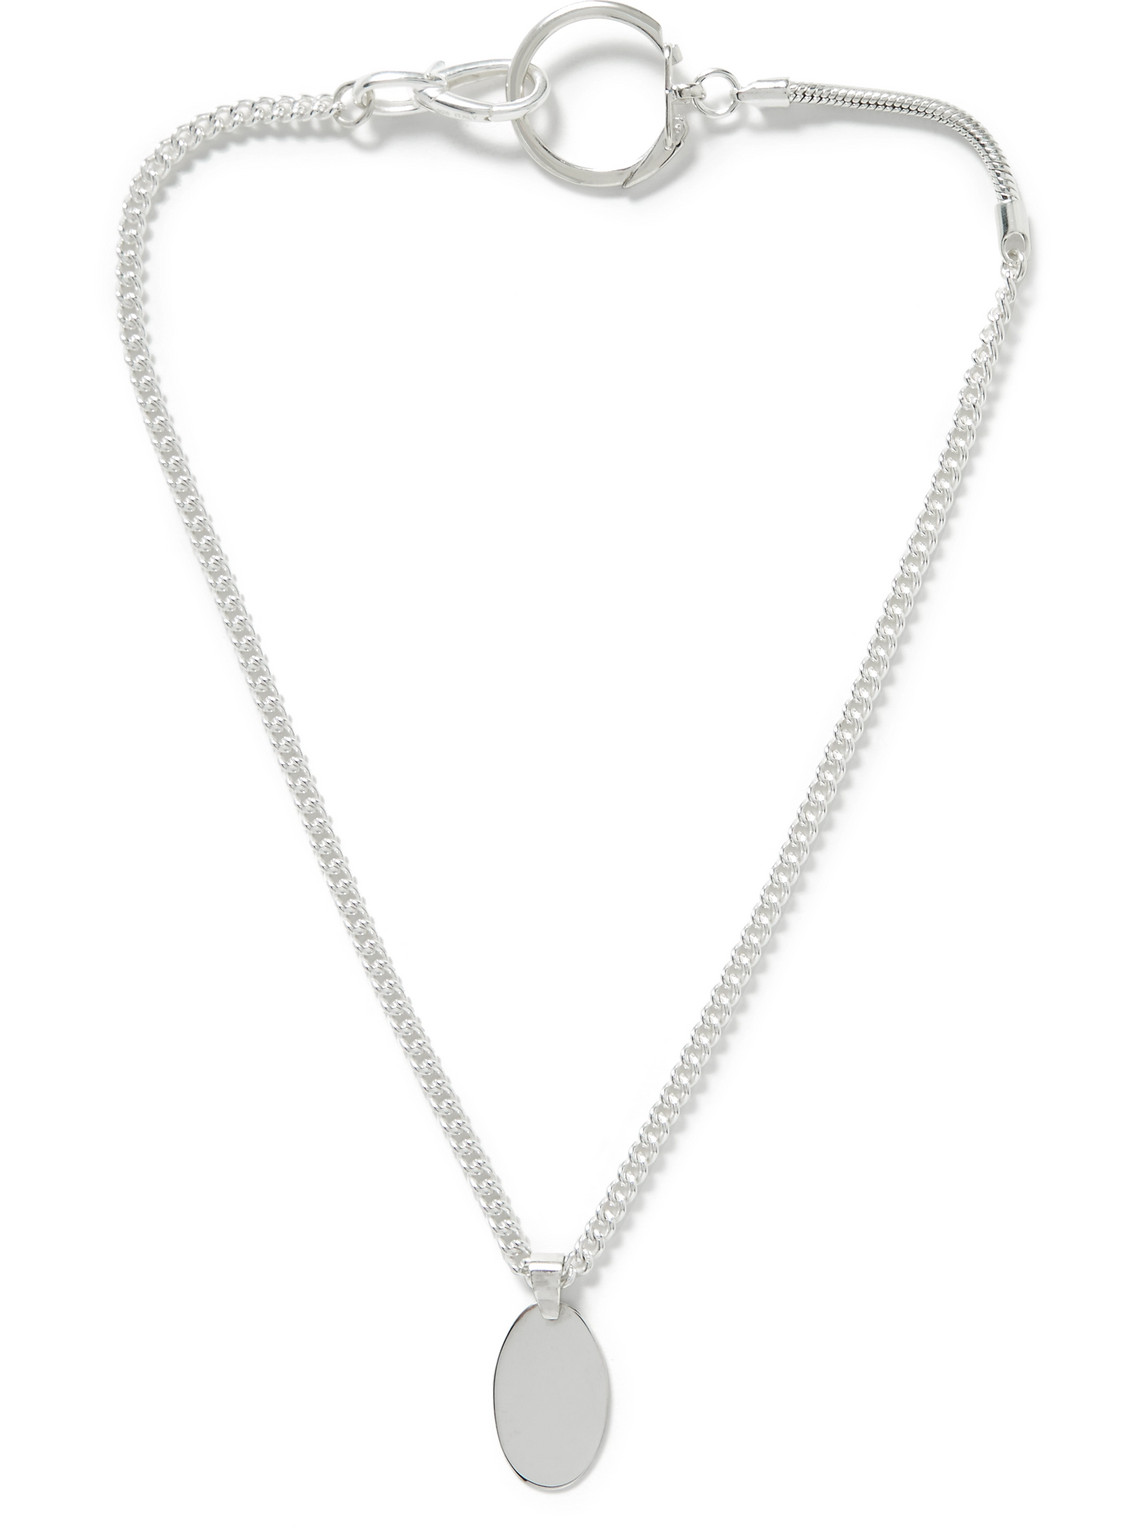 Martine Ali Tommy Tag Sterling Silver Pendant Necklace